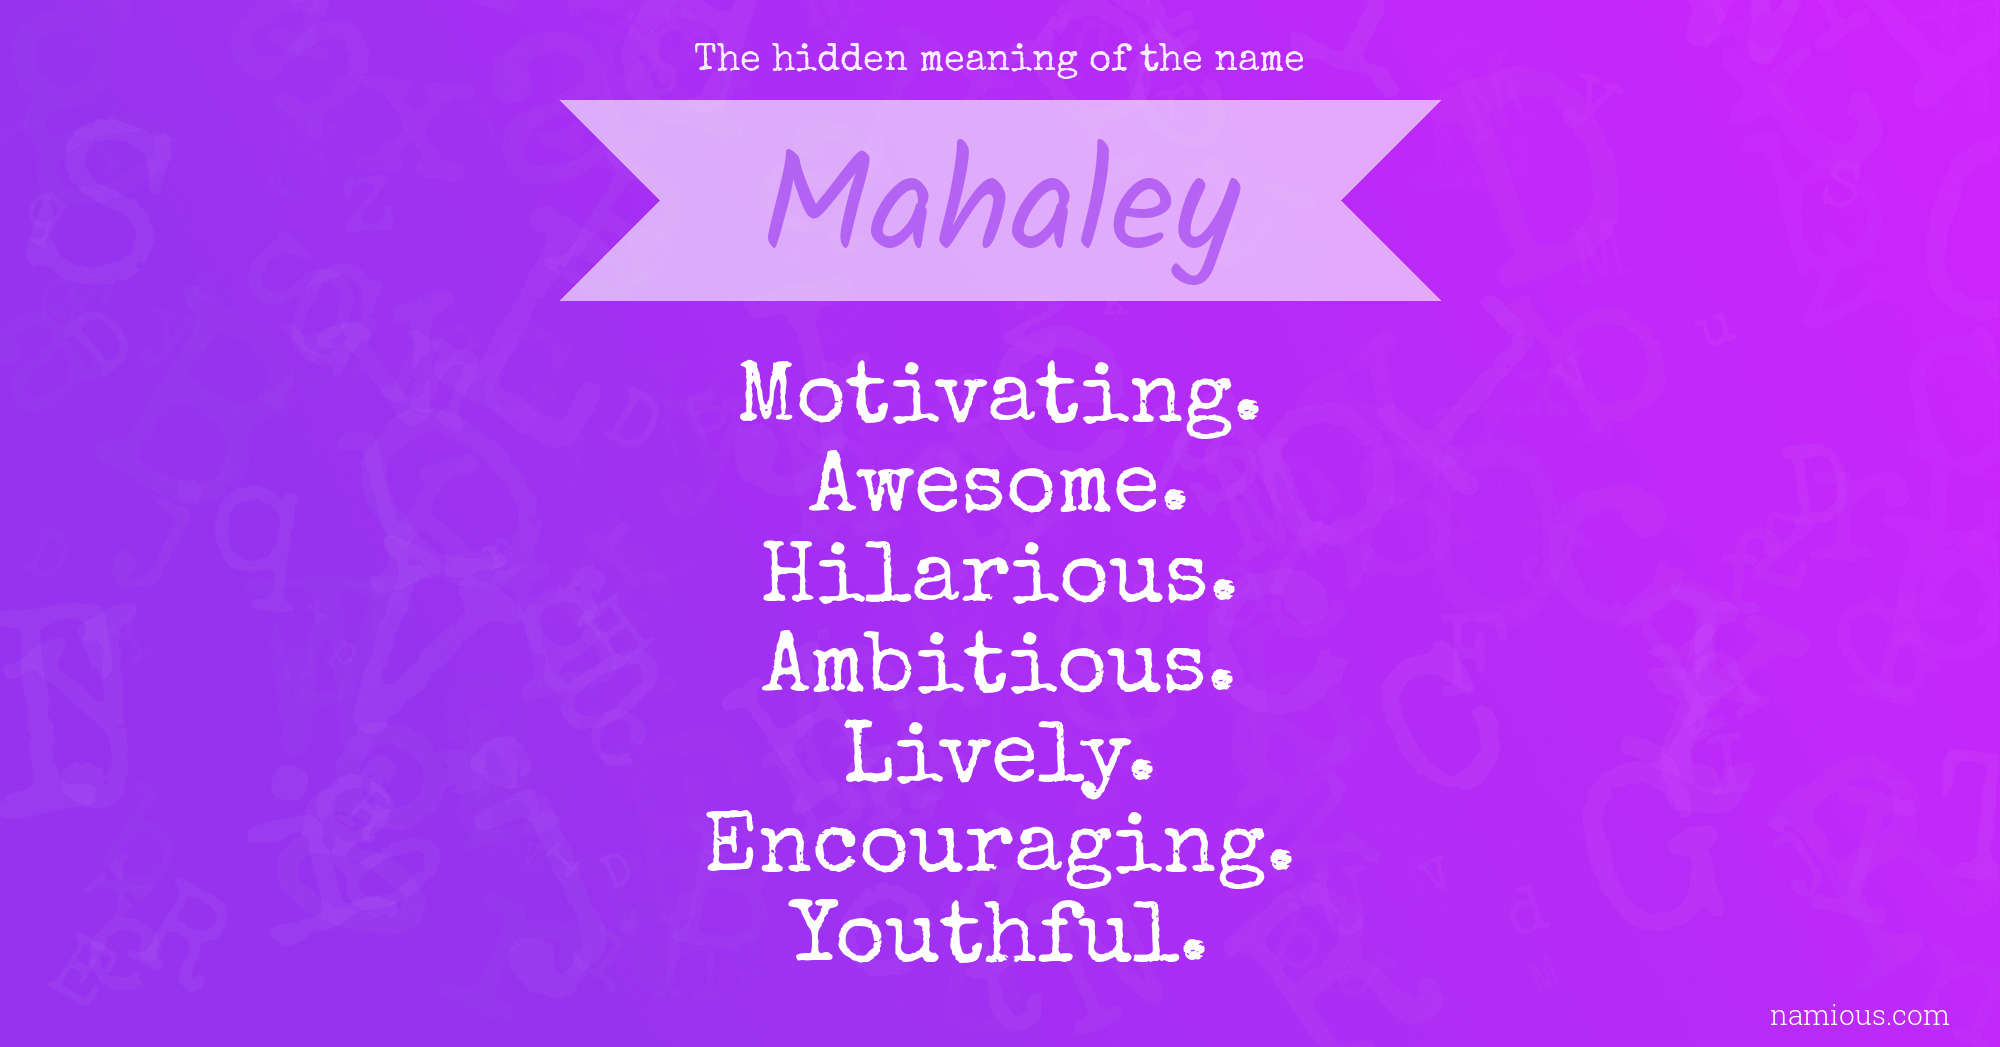 The hidden meaning of the name Mahaley